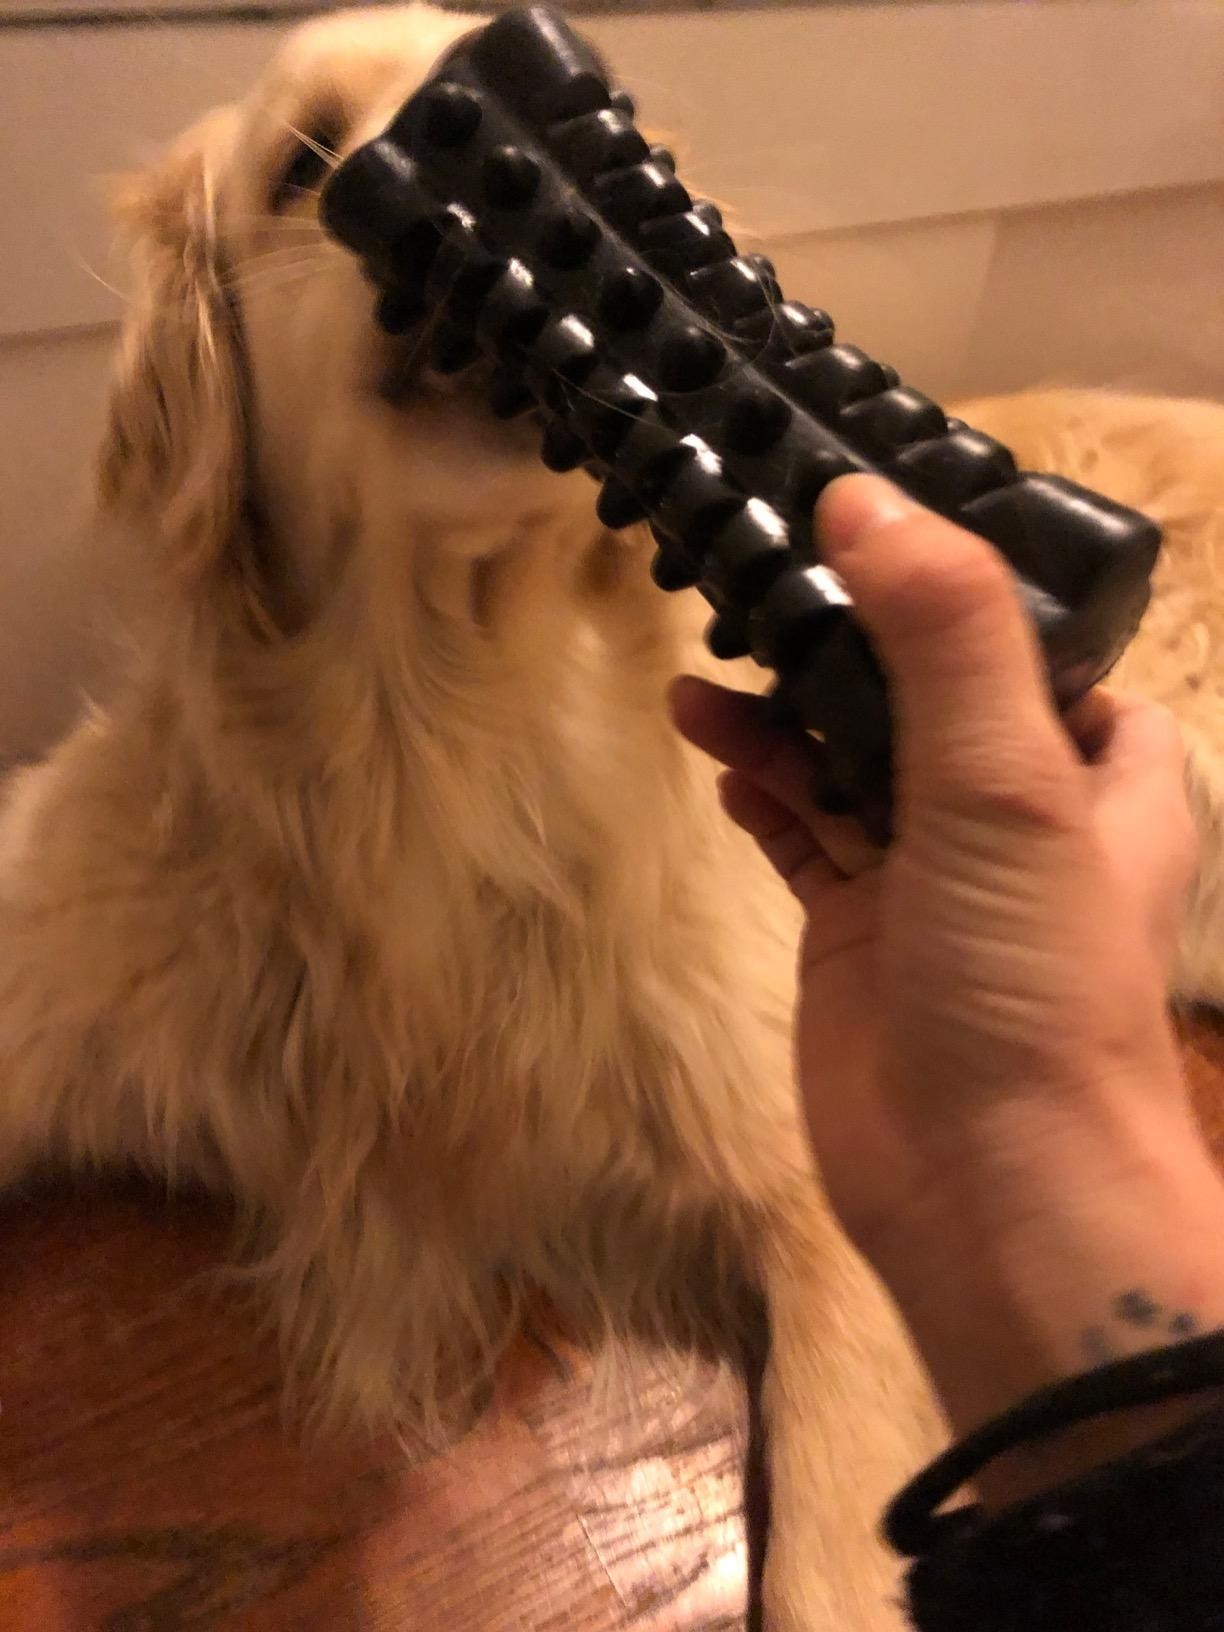 The chew toy in black — a long cylinder with rows of nubs for chewing